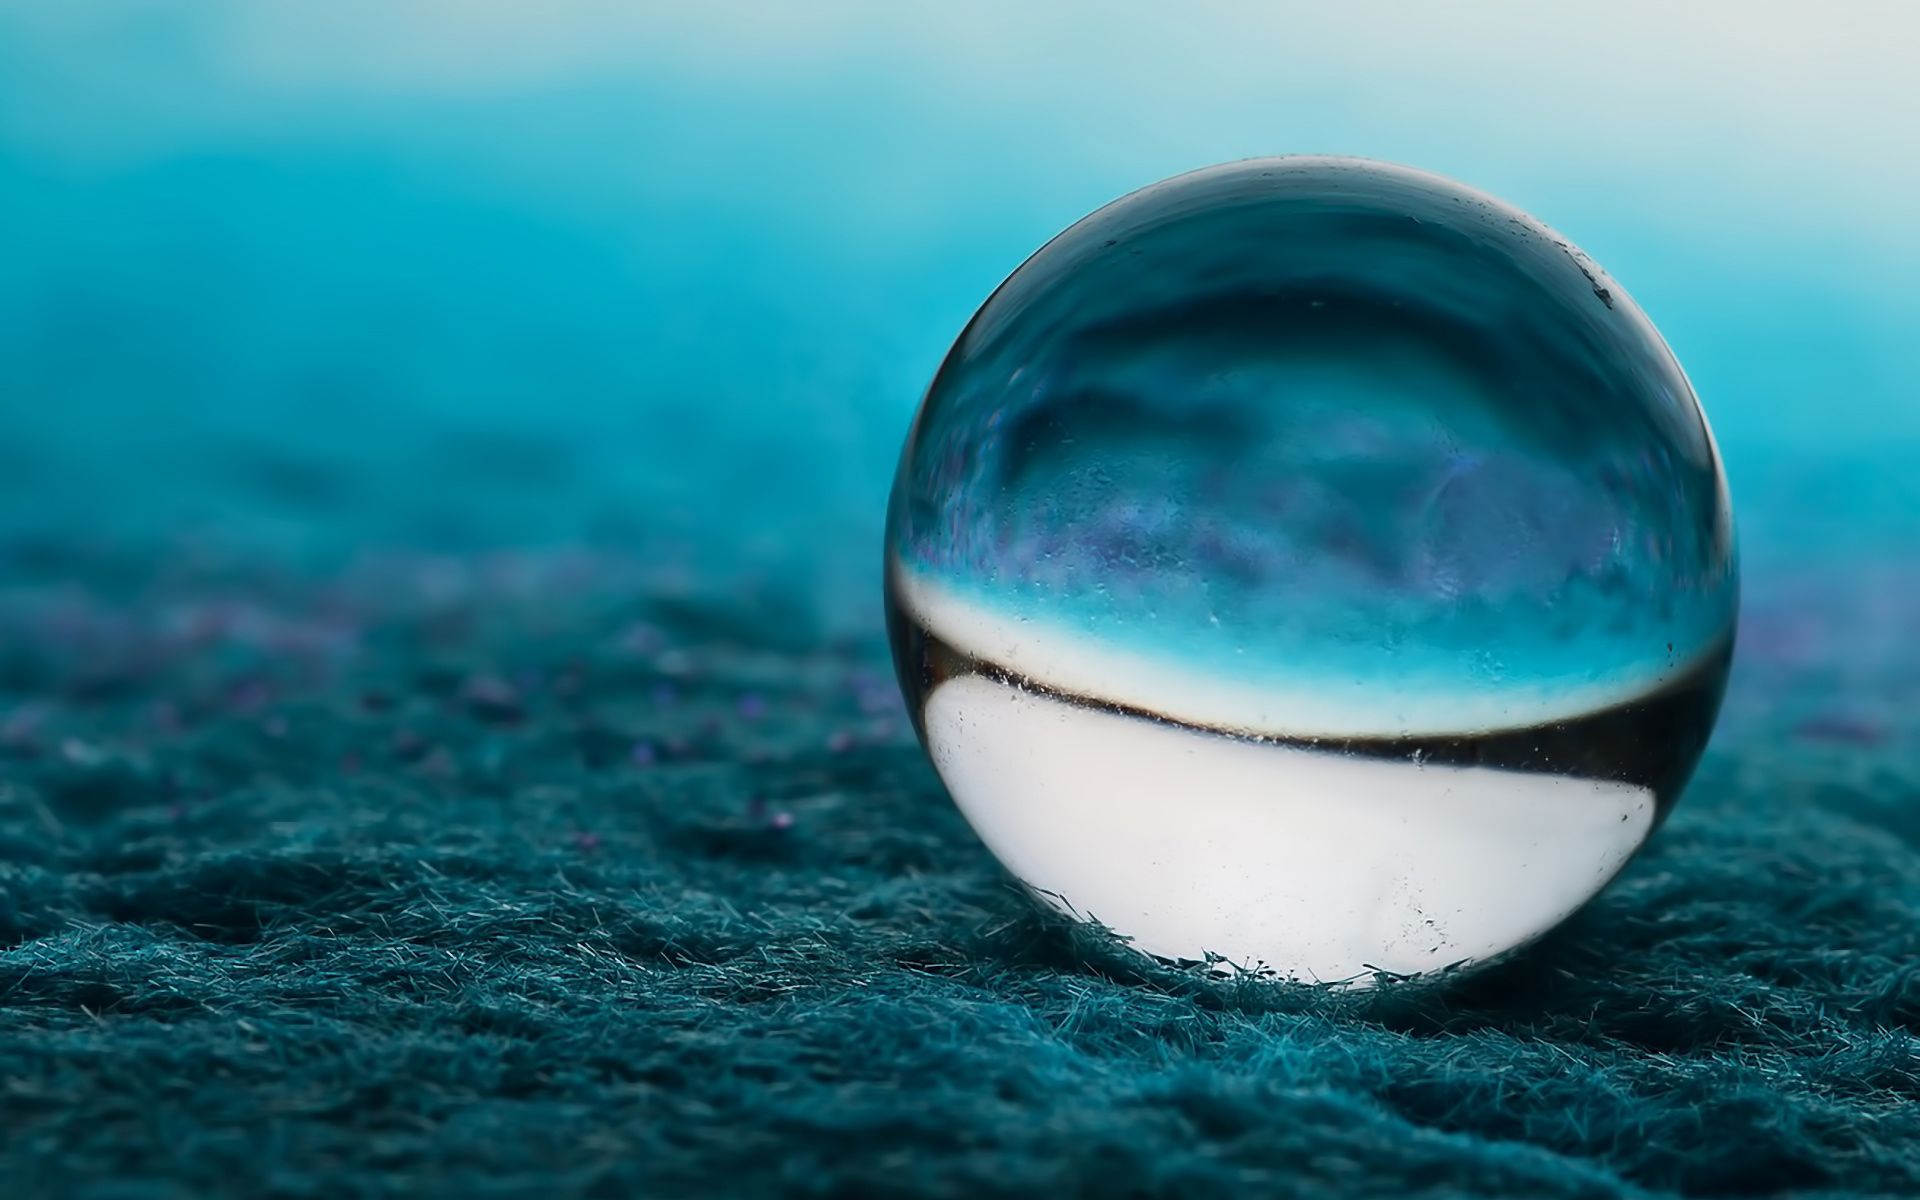 4k Glass Ball Wallpaper High Quality Android iPhone HD